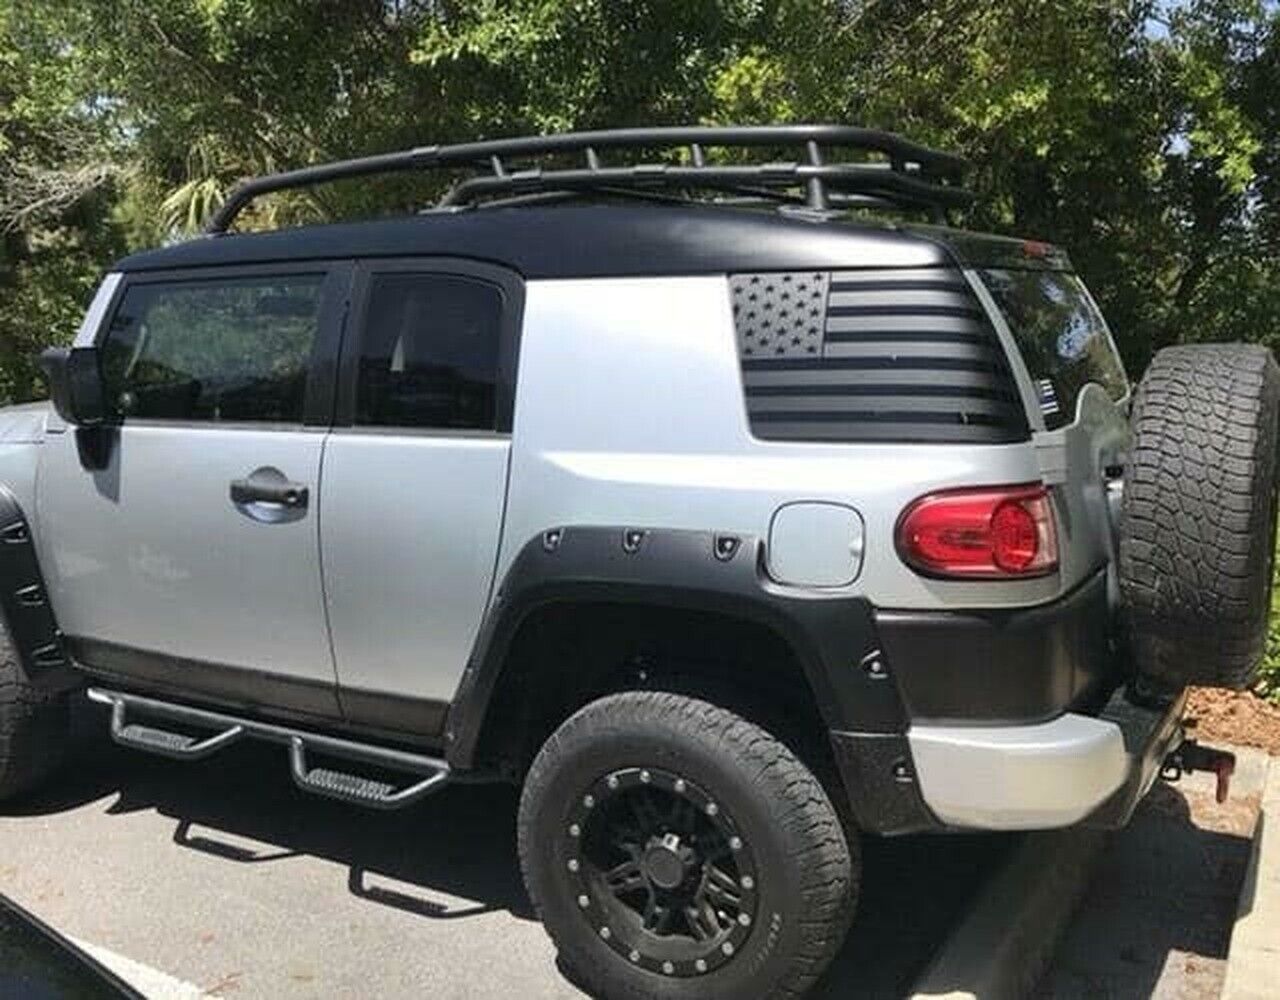 USA Flag Decals for Toyota Fj Cruiser Hardtop Rear window TRD Offroad Tacoma pro